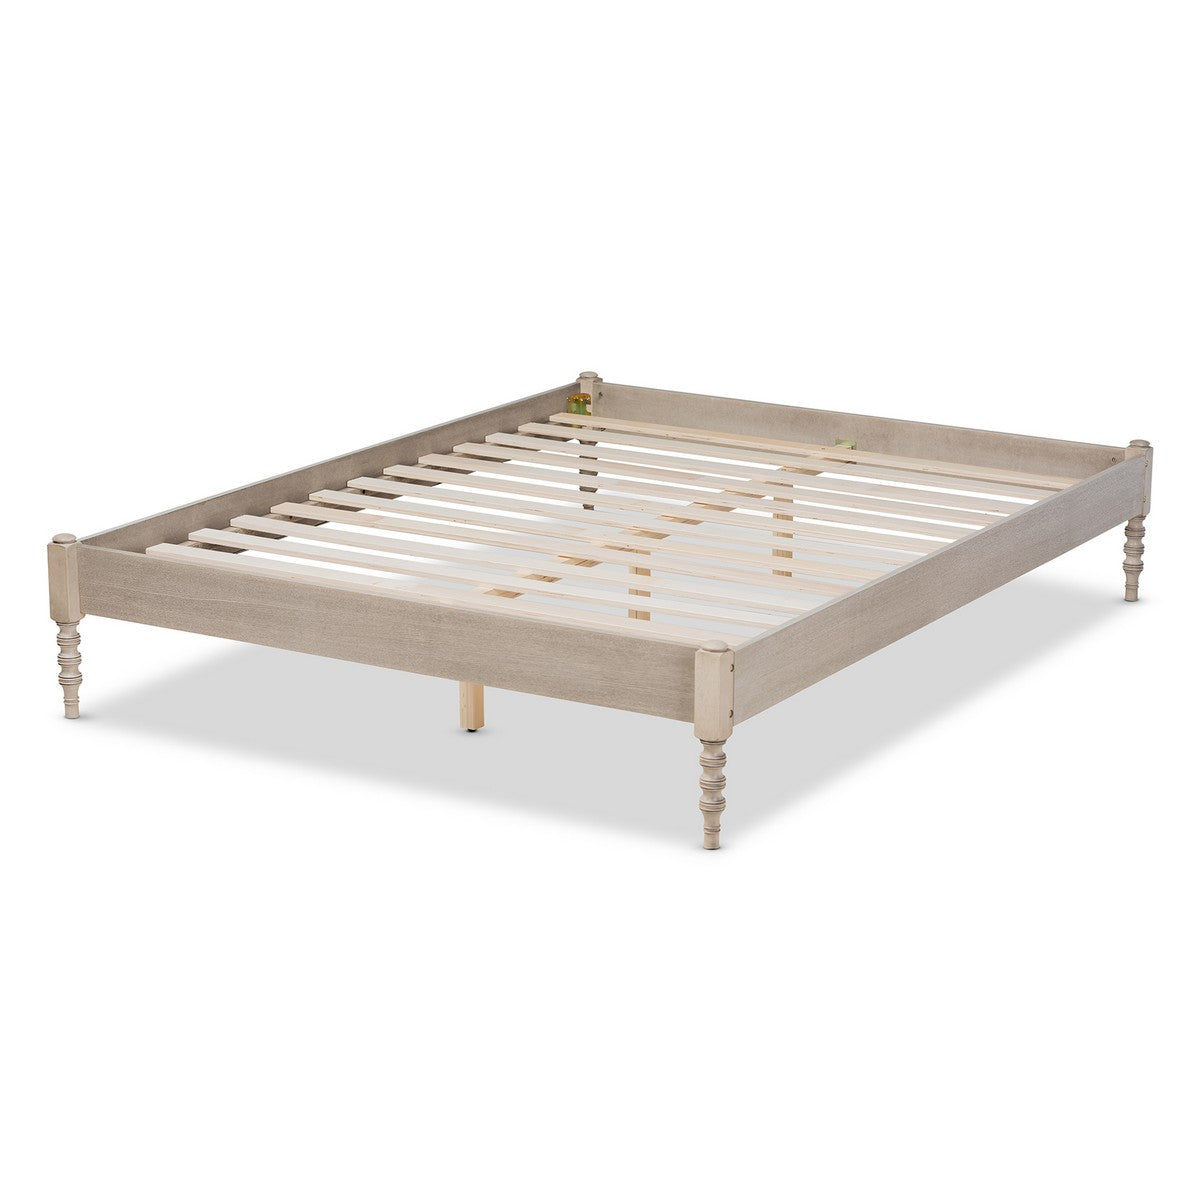 Baxton Studio Cielle French Bohemian Antique White Oak Finished Wood Queen Size Platform Bed Frame